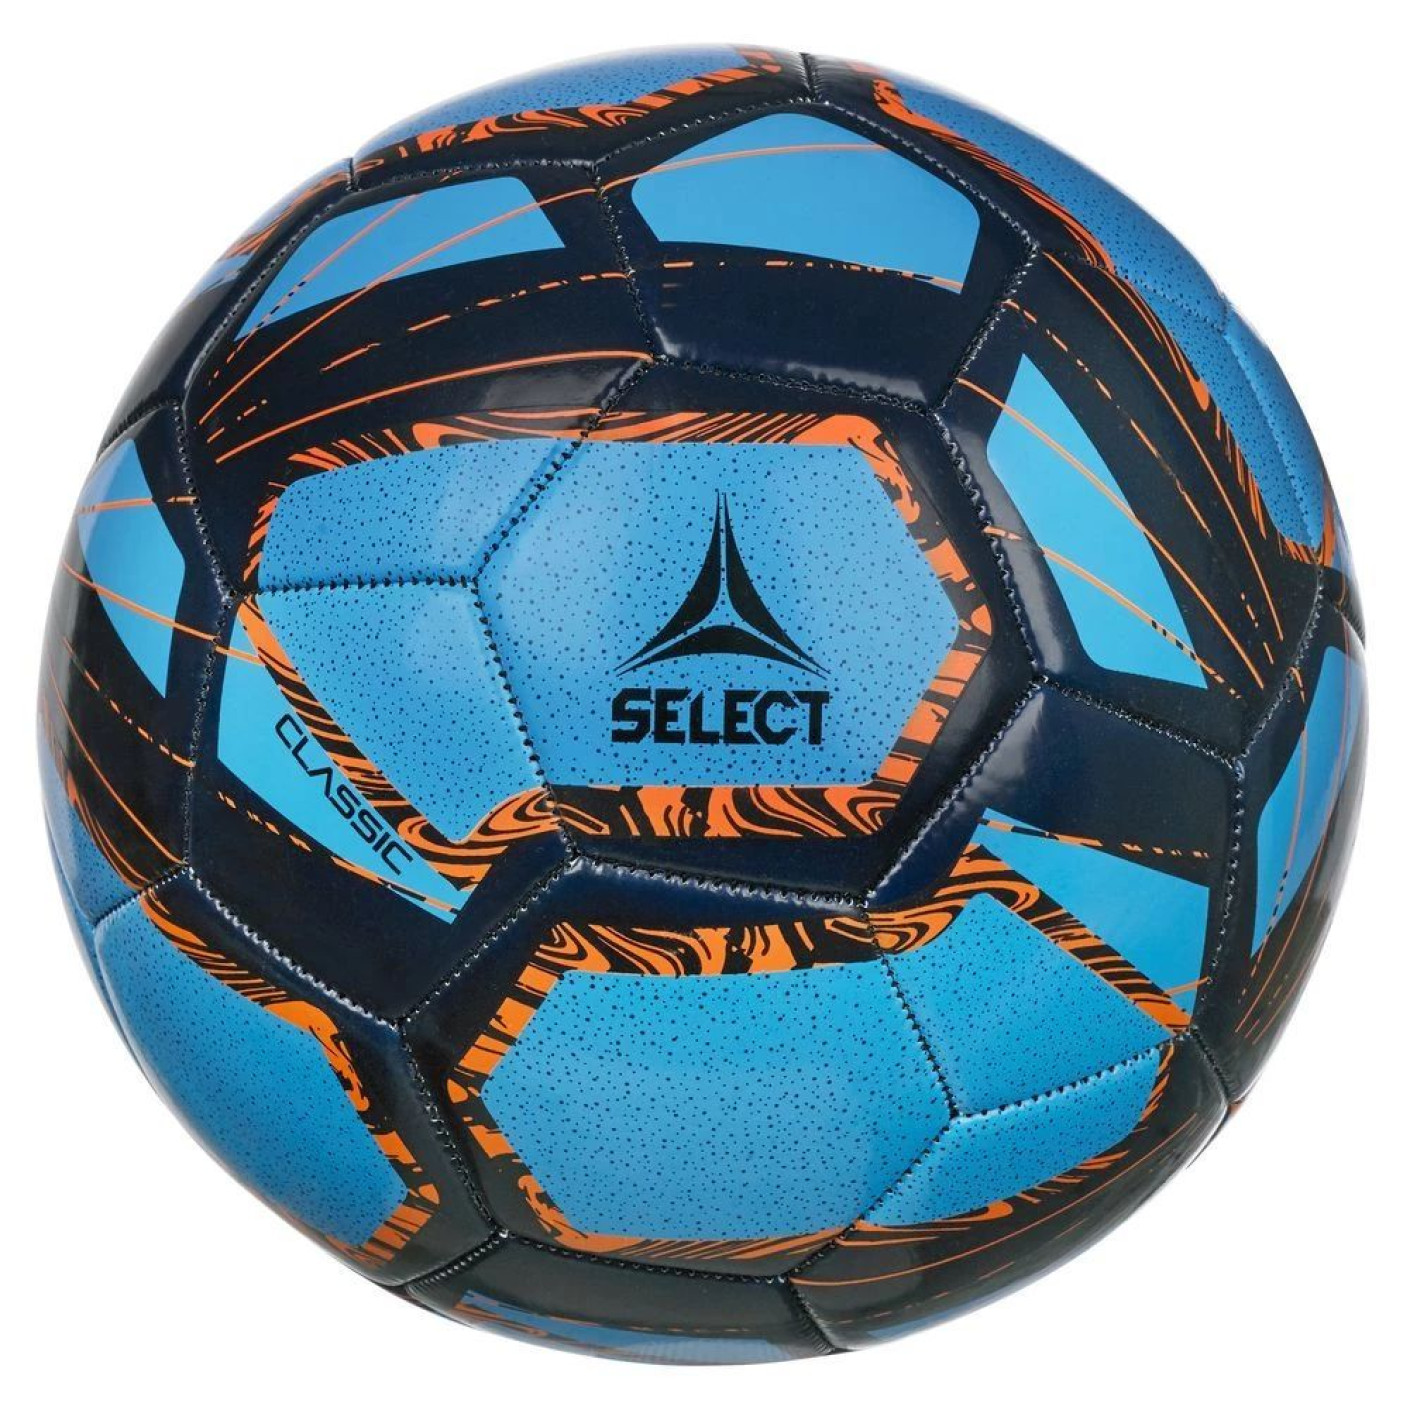 Select Classic v22 Voetbal Blauw Donkerblauw